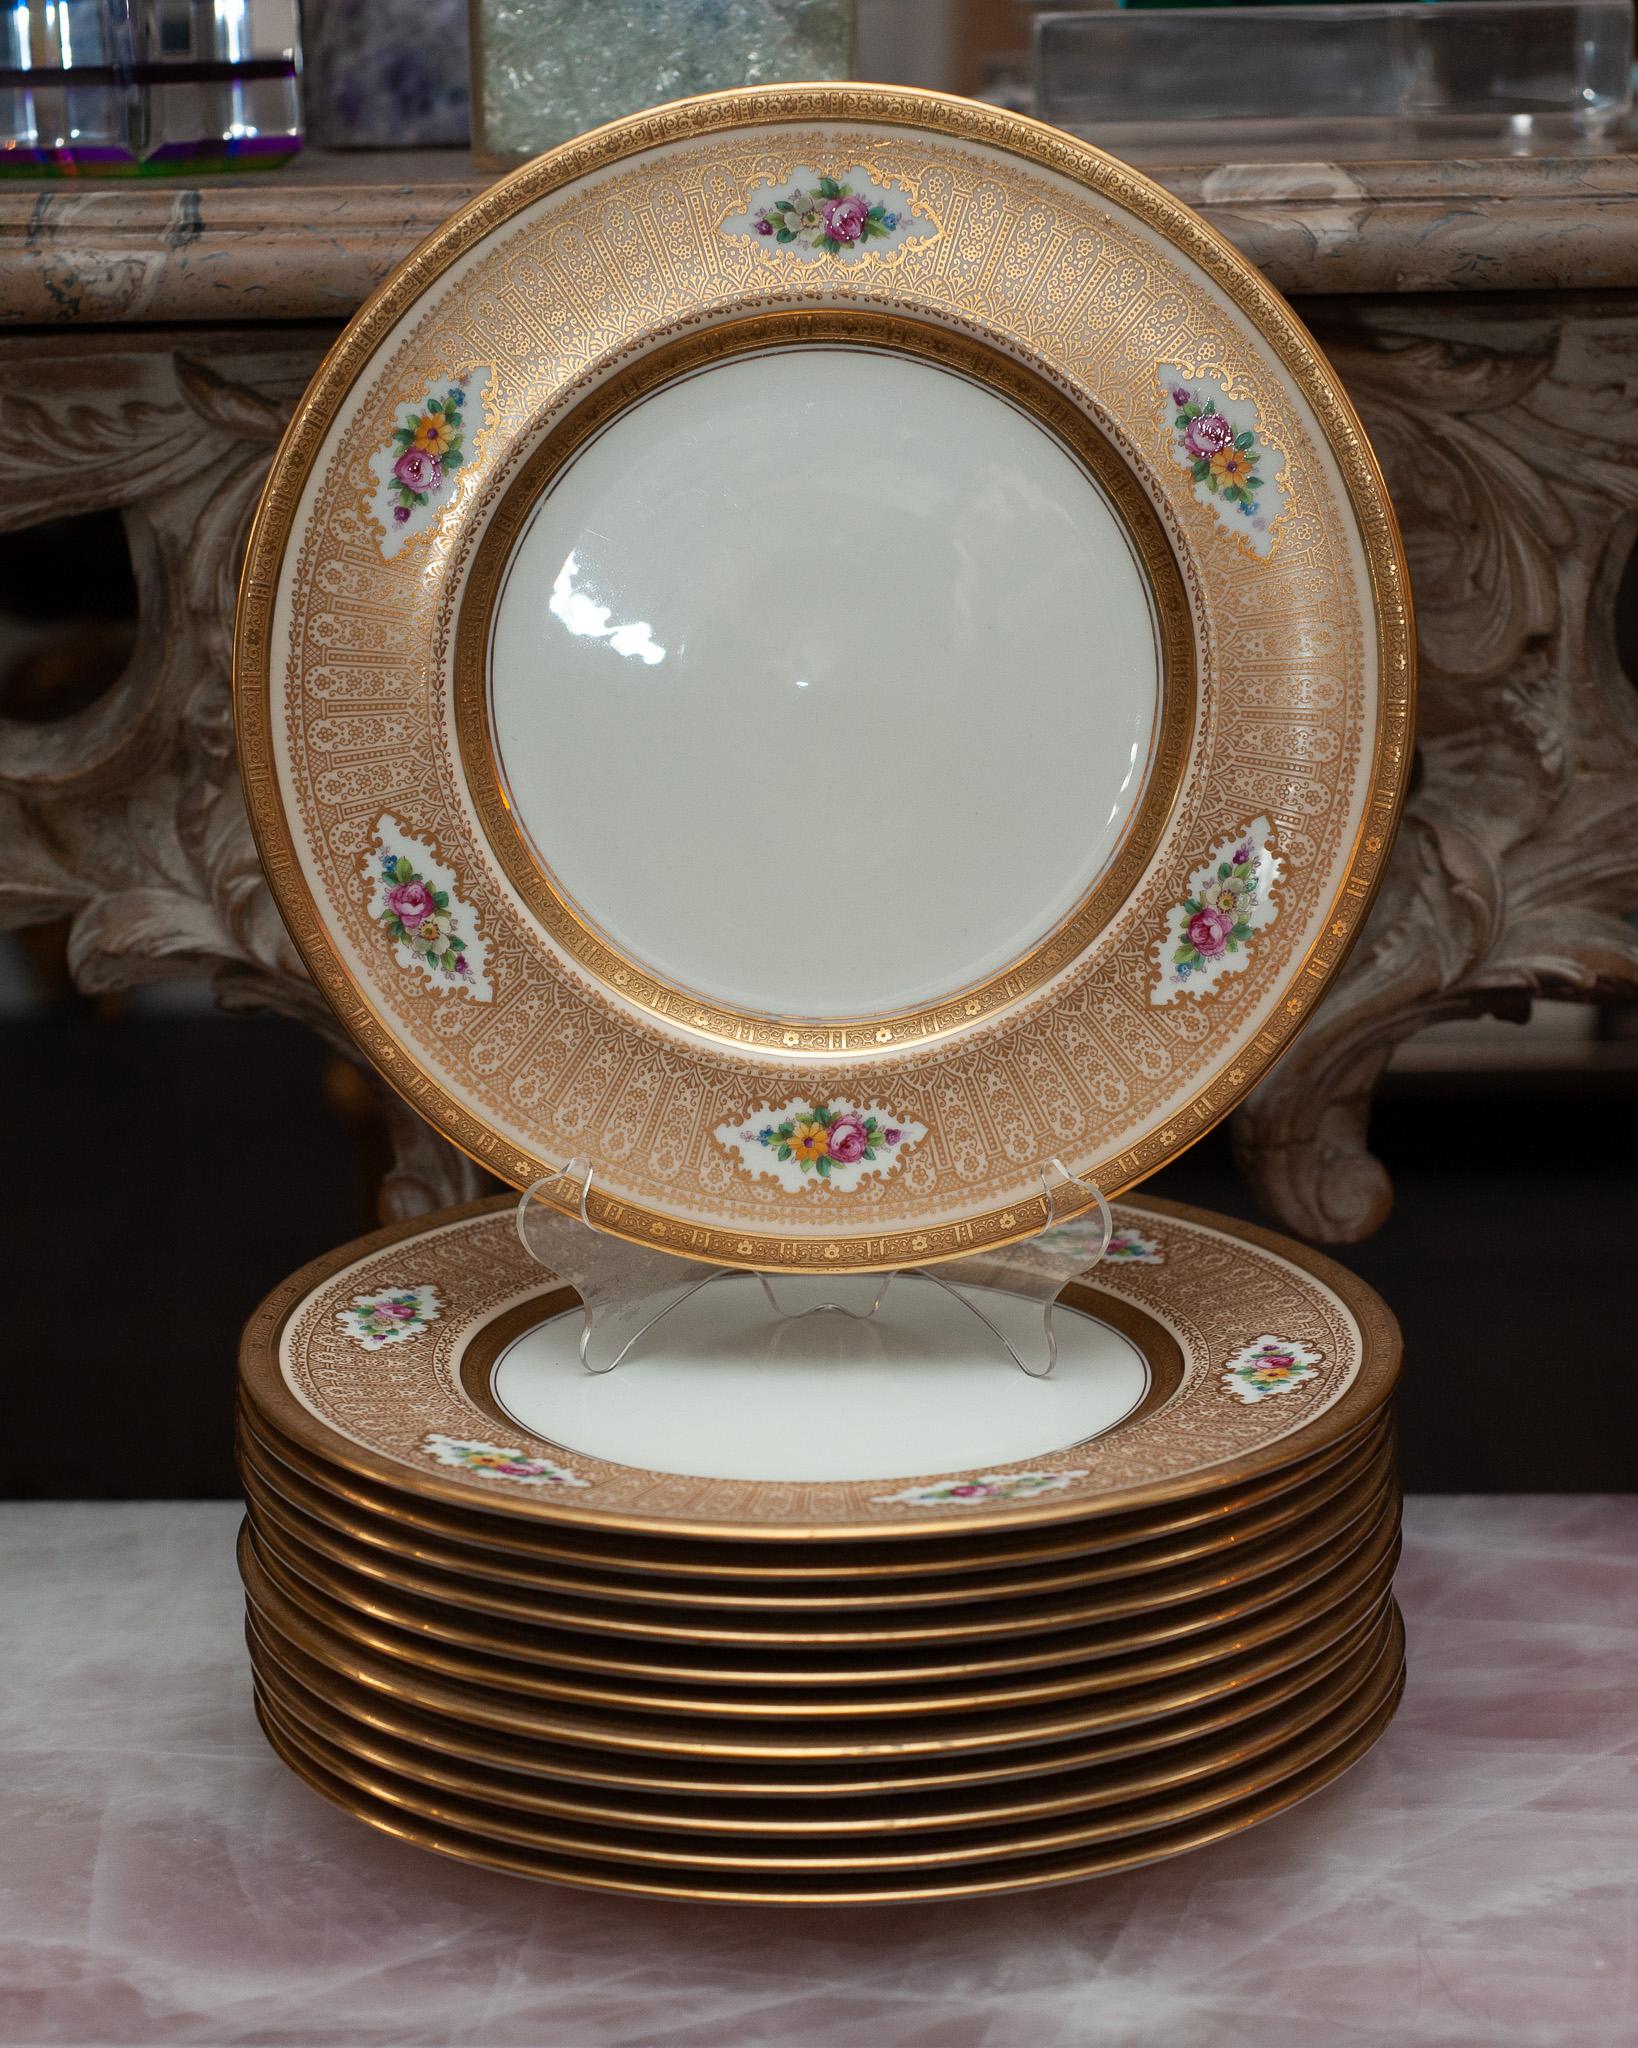 A stunning set of 12 antique gold and floral Cauldon dinner plates made for Cowell & Hubbard Co, Ohio. Elaborately gilded with a touch of floral motifs, these elegant and timeless plates will dress up any table and add richness to contemporary